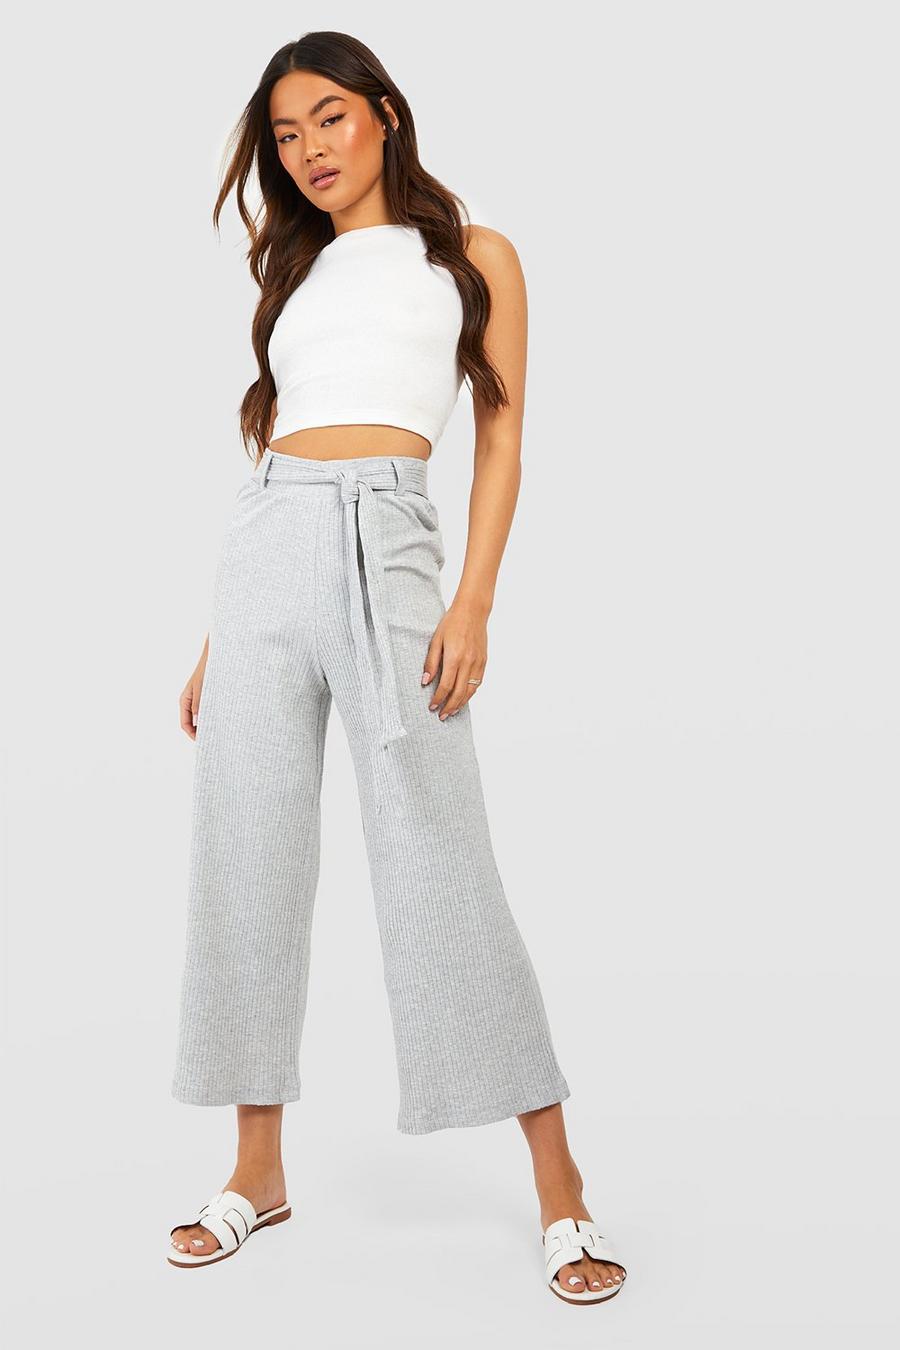 Grey marl Ribbed Belted Culotte Pants